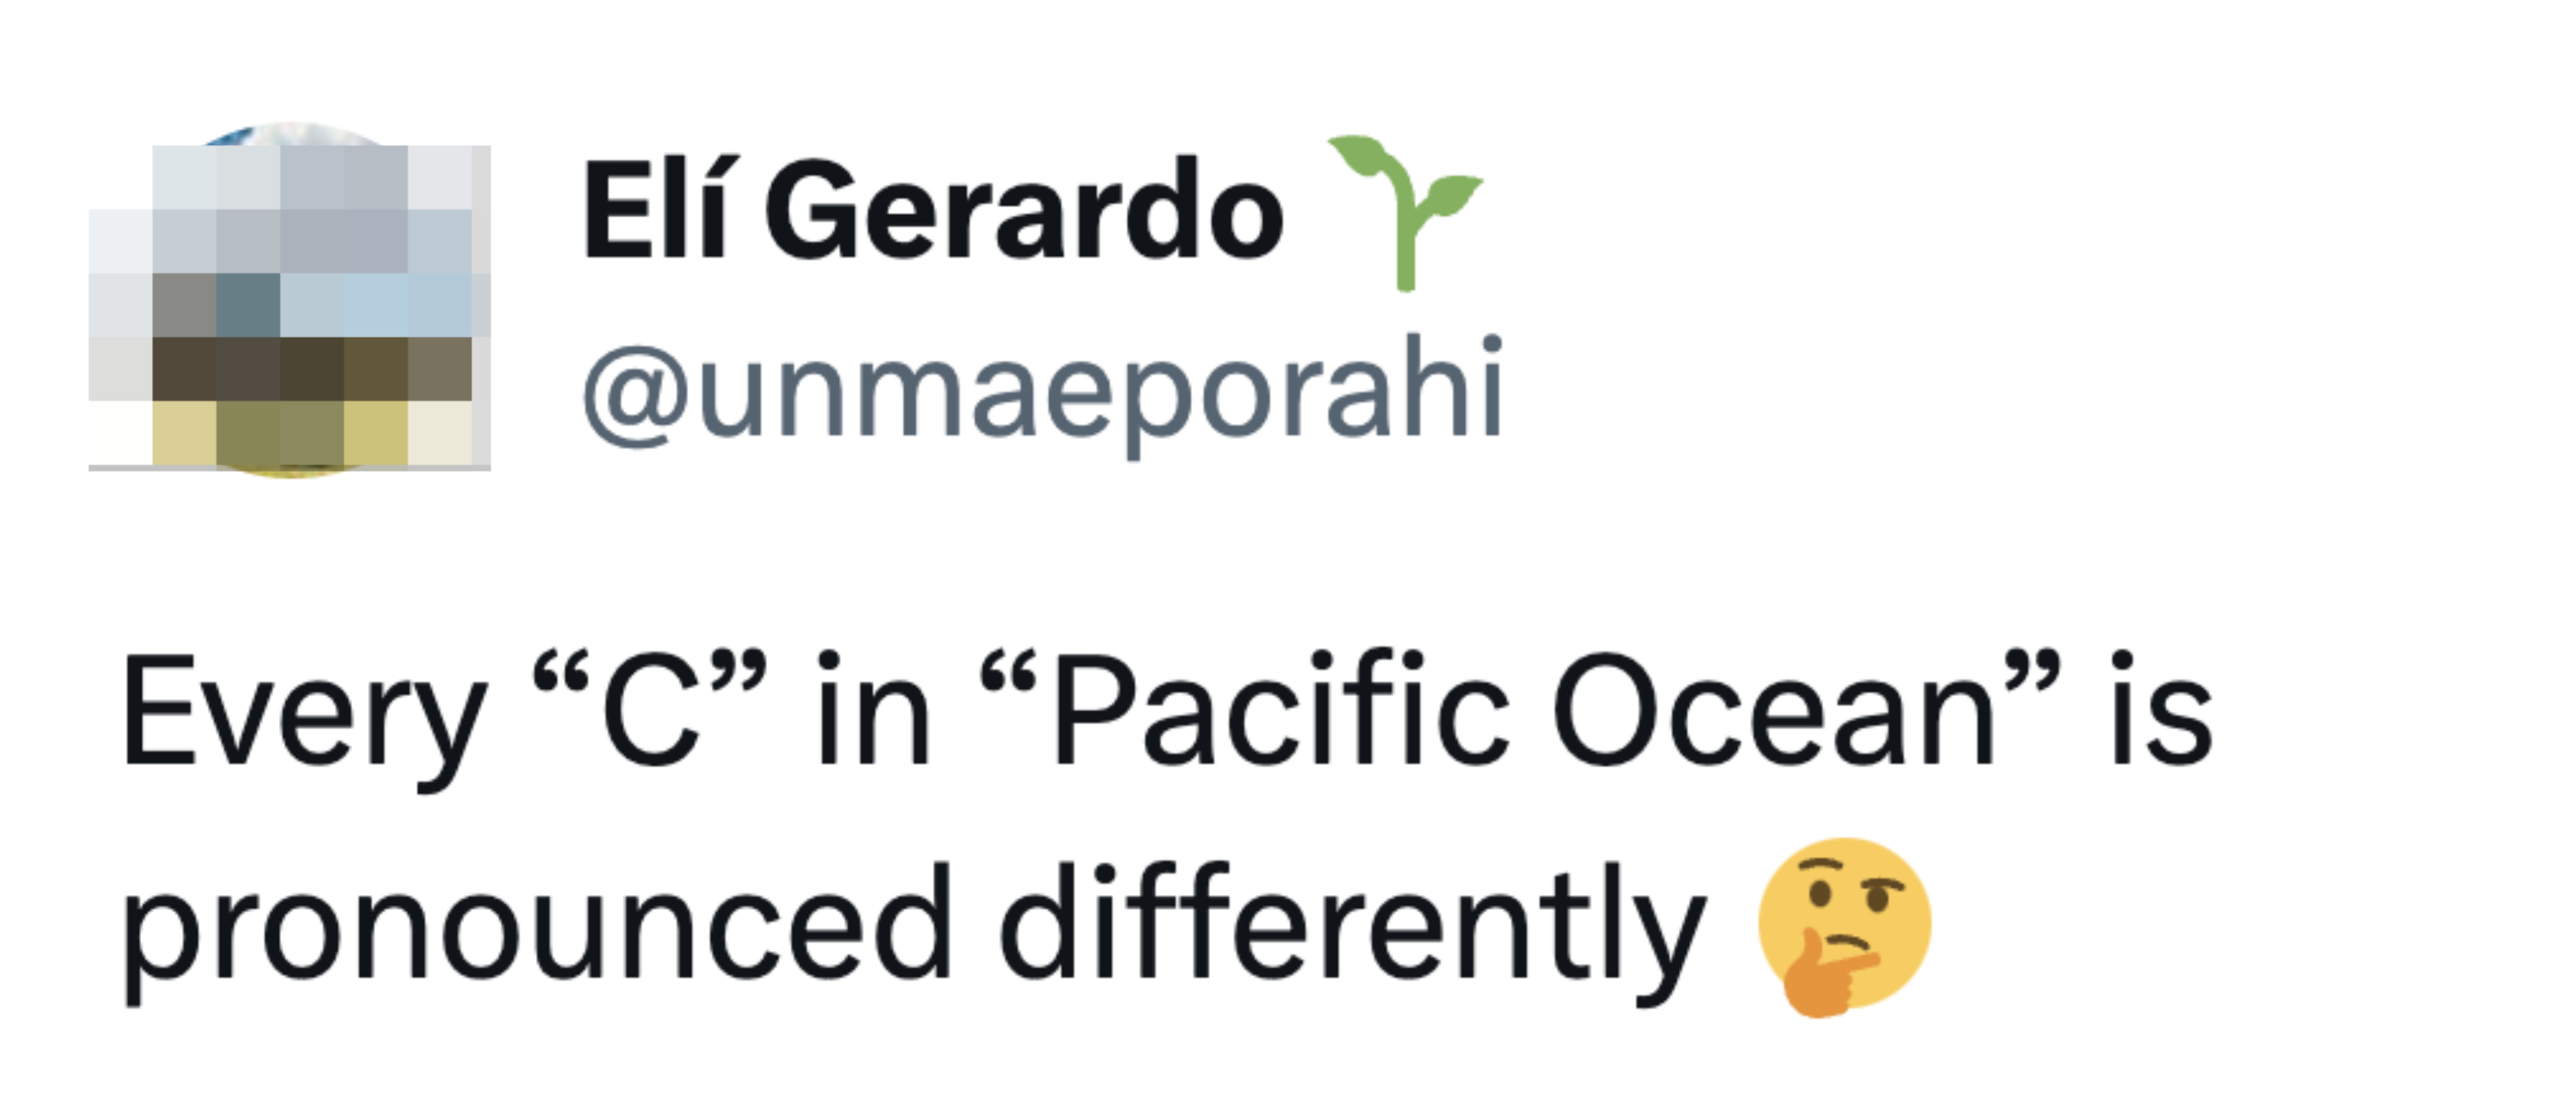 &quot;Every &#x27;C&#x27; in &#x27;Pacific Ocean&#x27; is pronounced differently&quot;